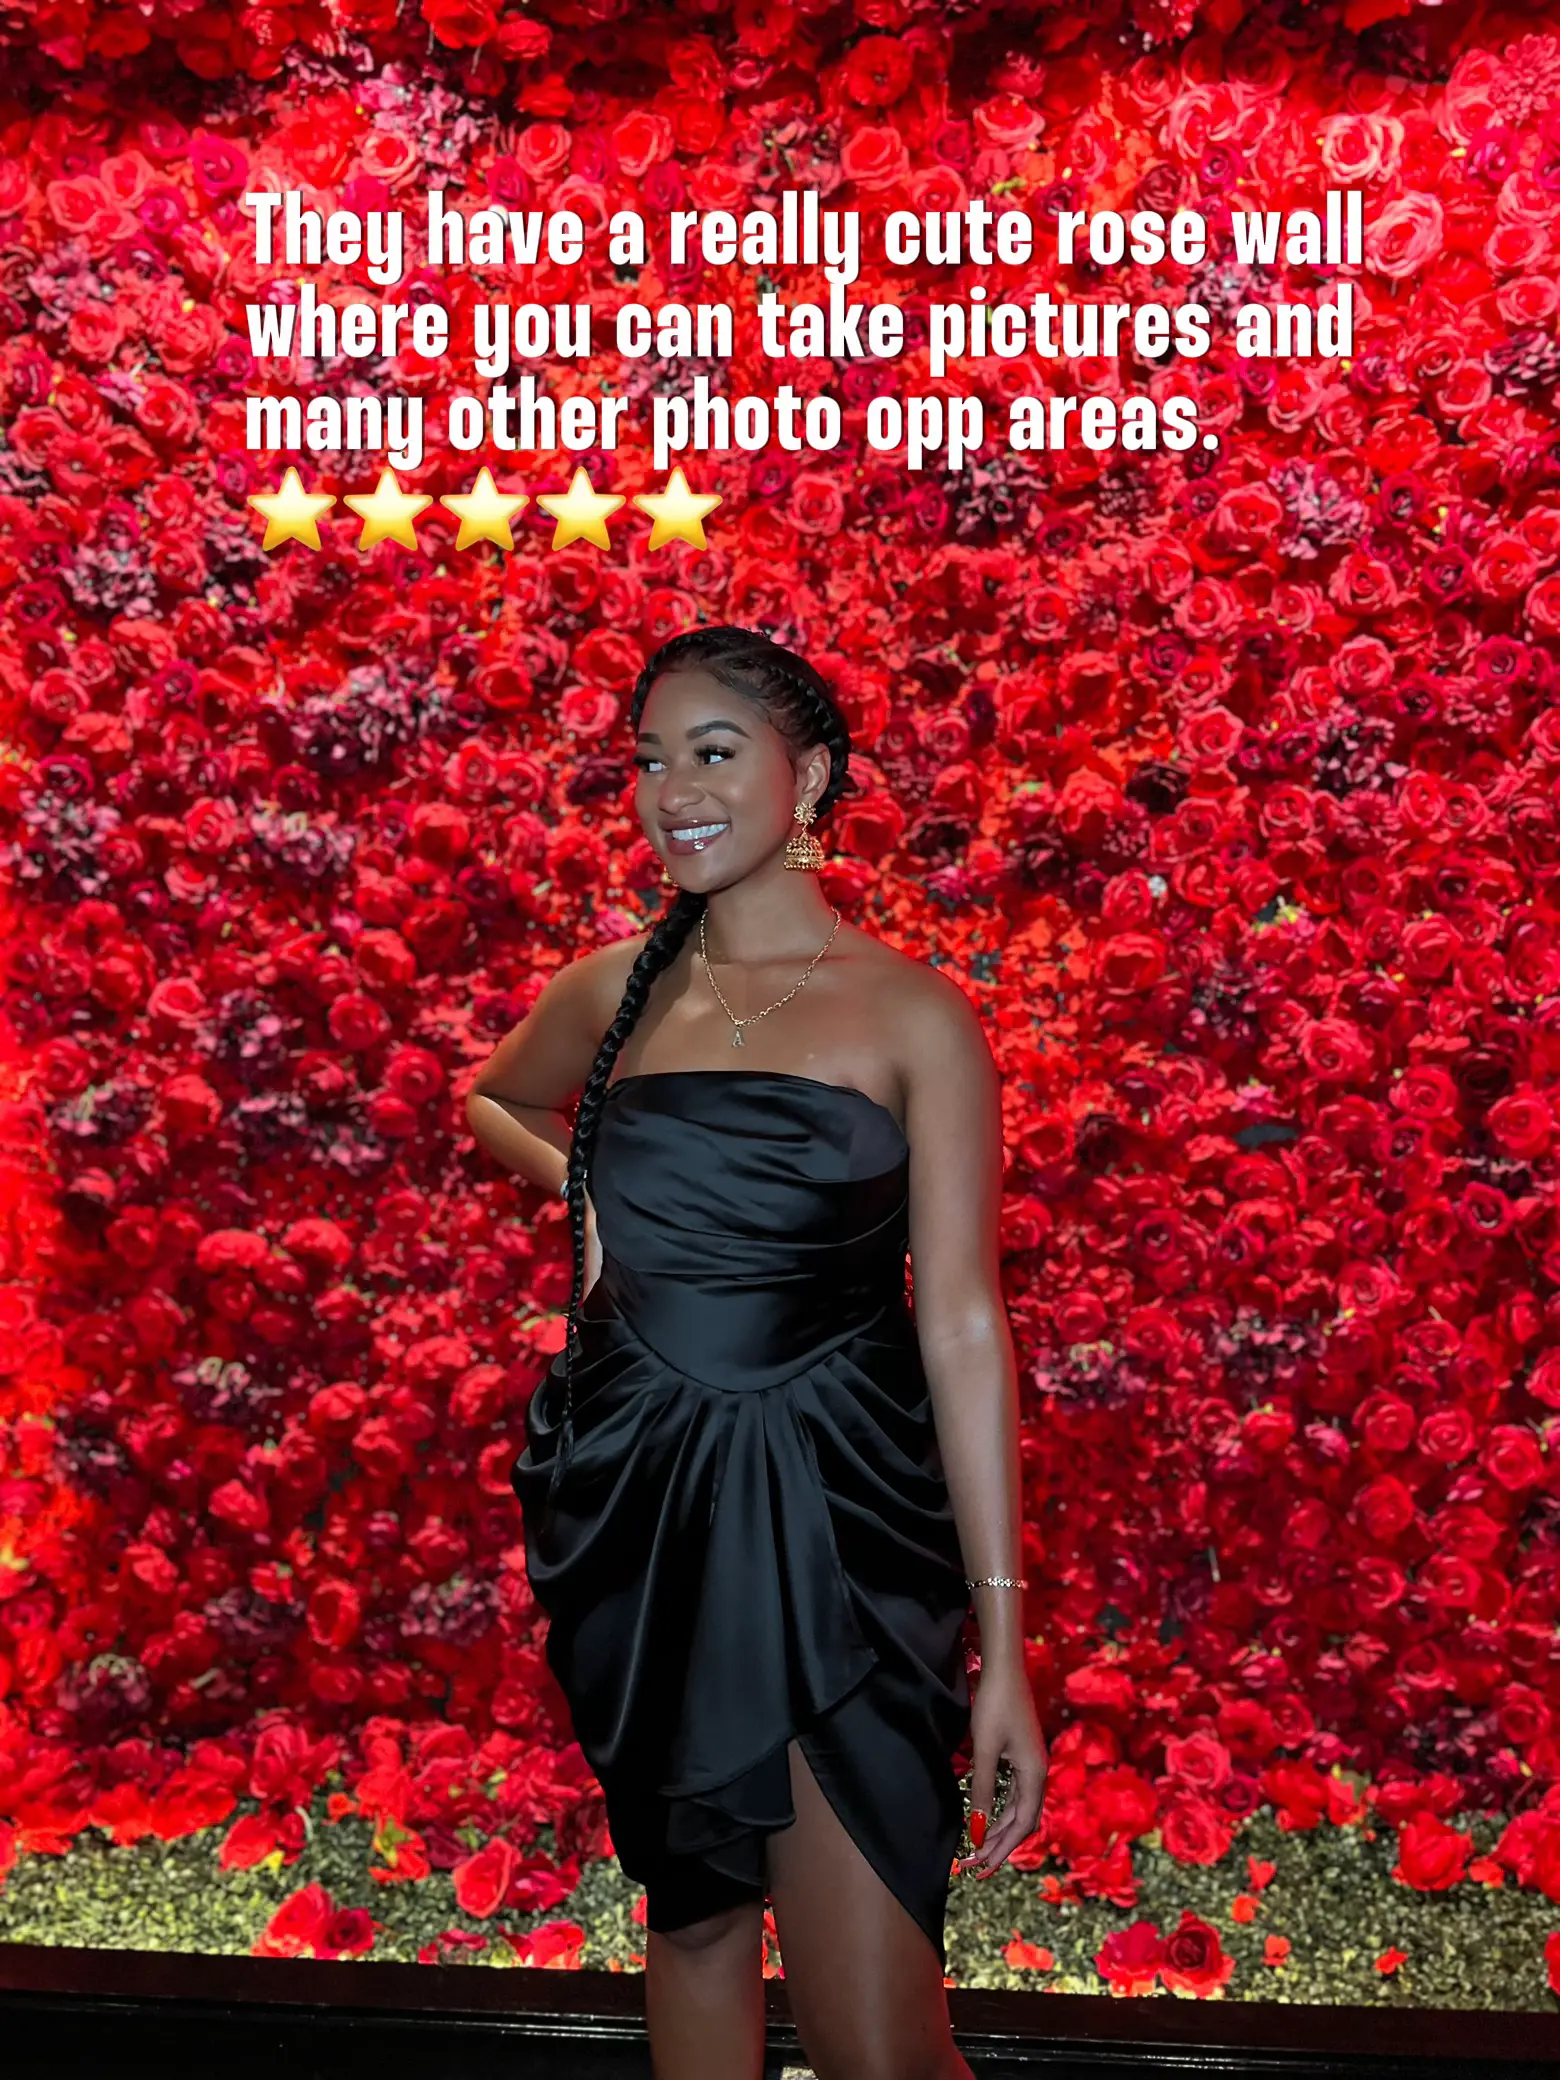  A woman wearing a black dress is standing in front of a rose wall.